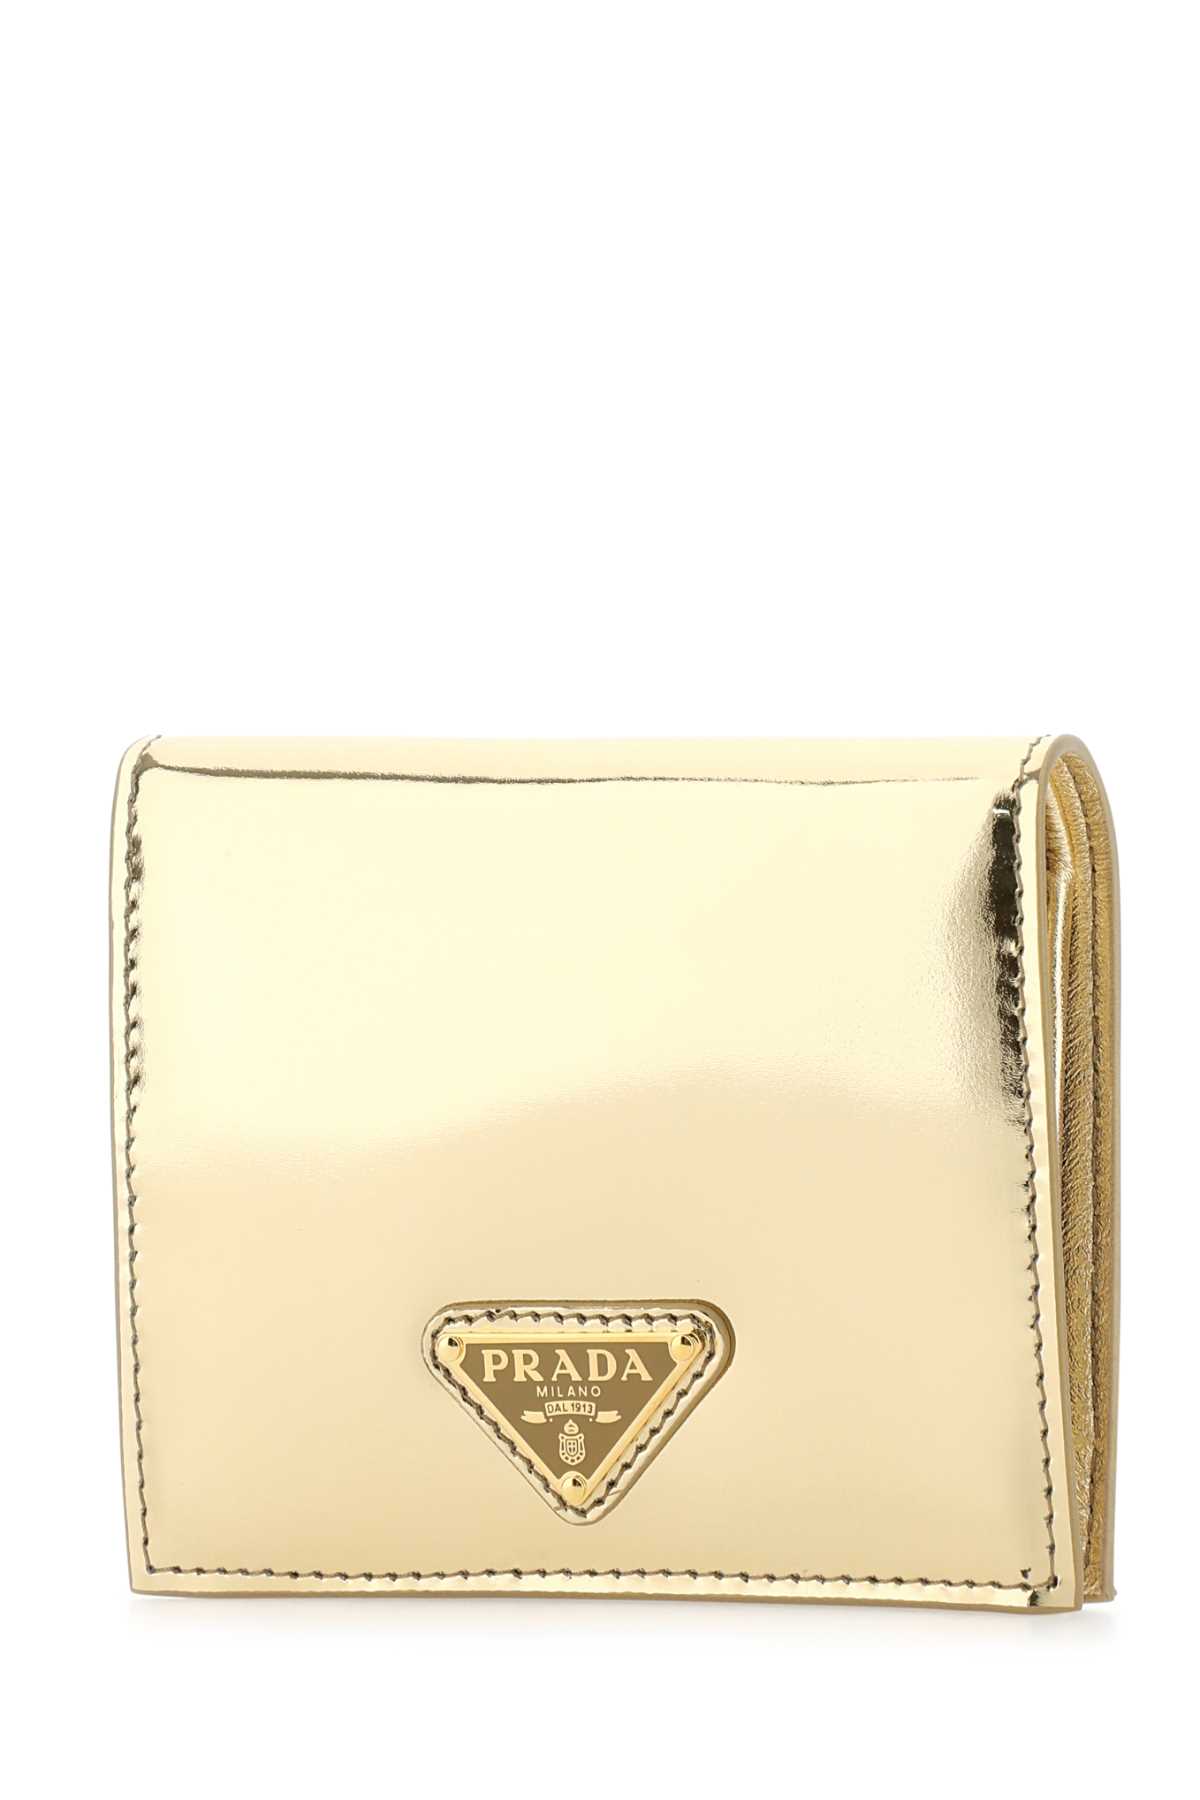 Prada Gold Leather Wallet In Silver